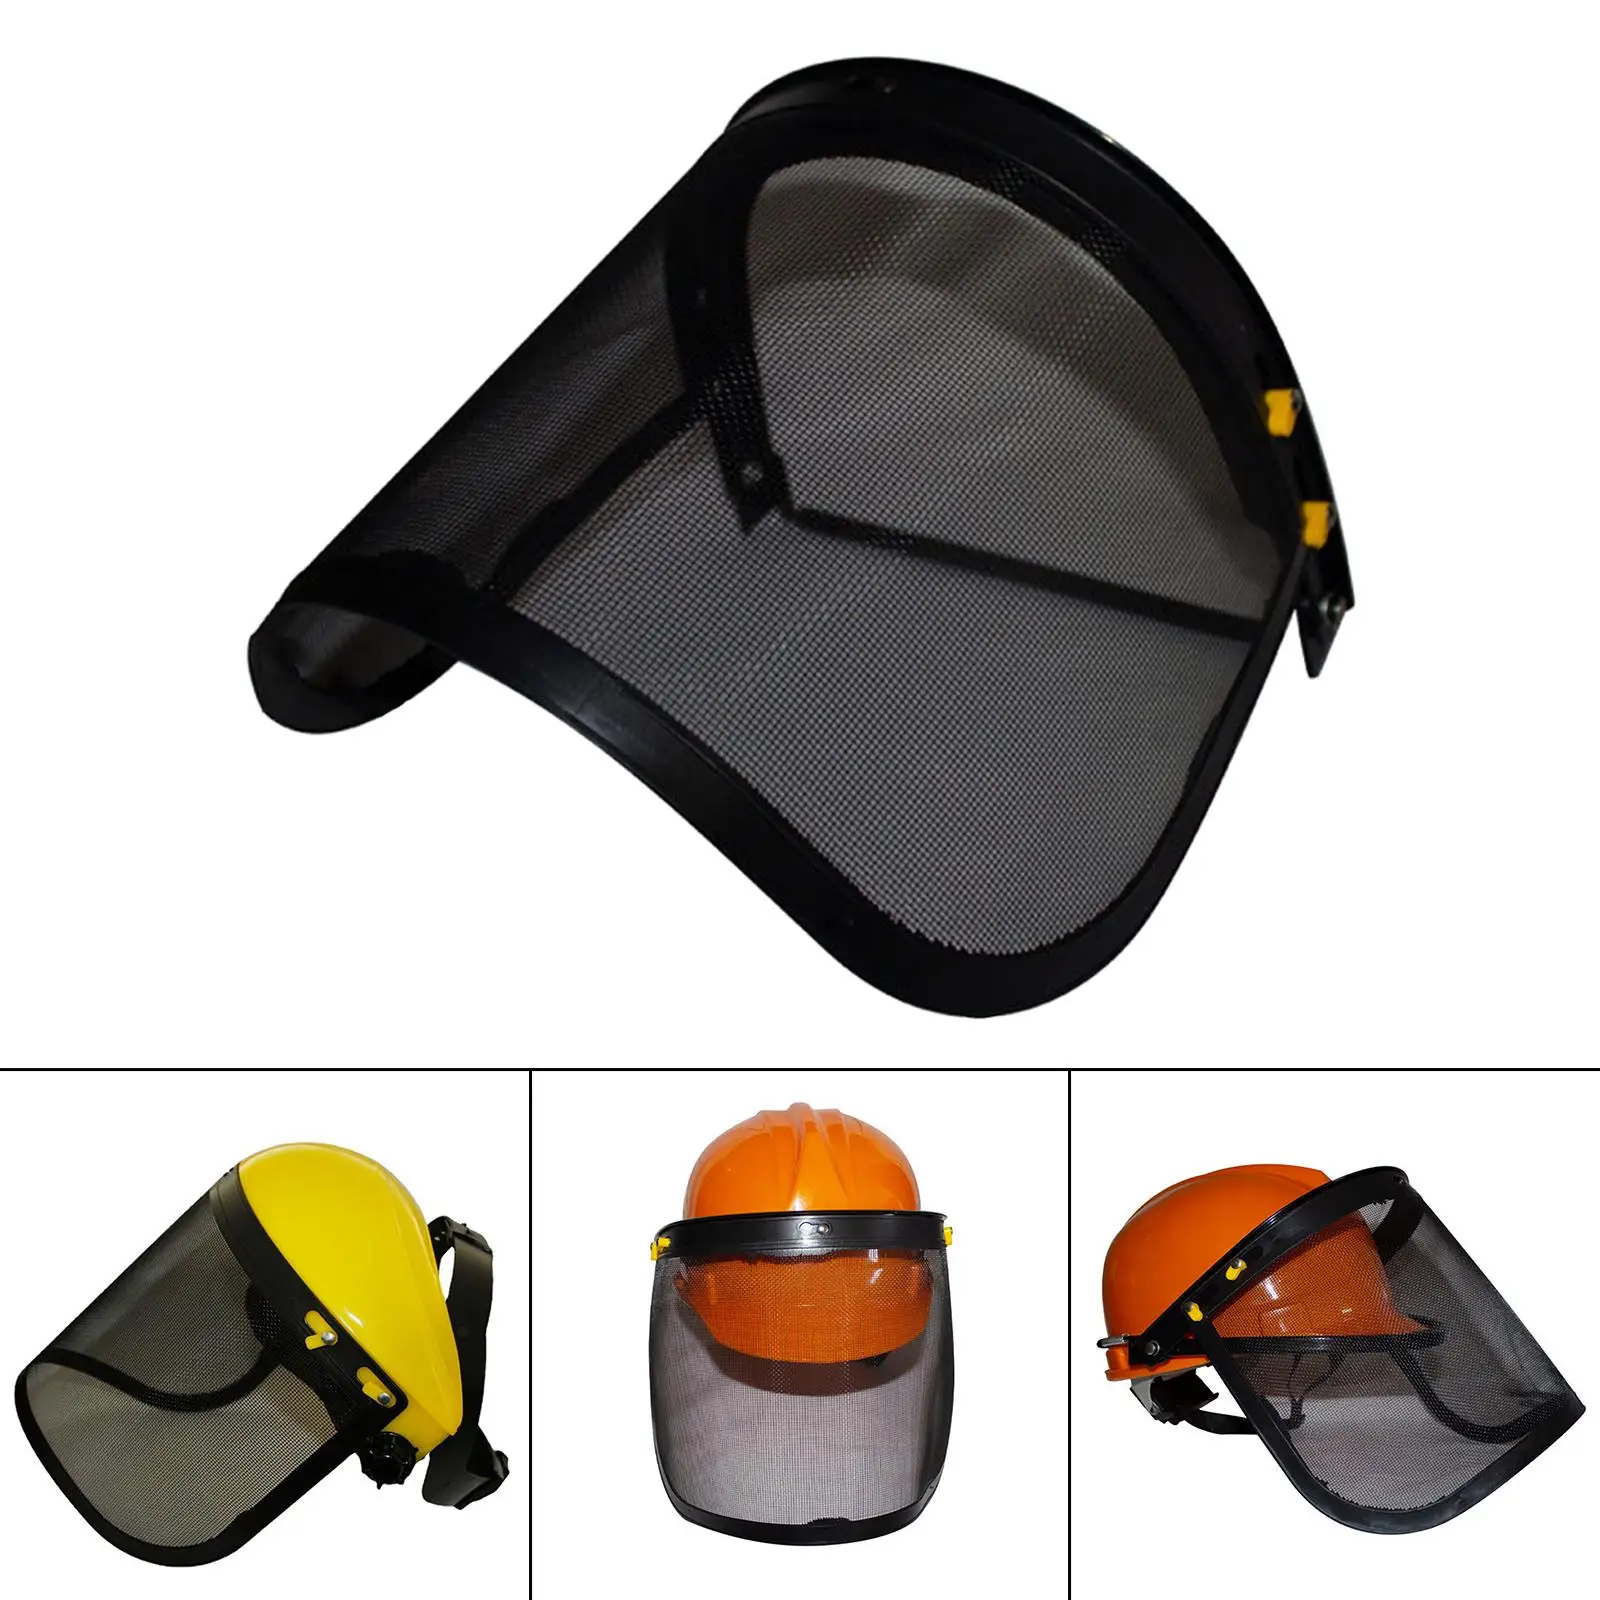 Premium Forestry Screen Visor Face Protection Mesh Visor Forestry Mesh Visor Protective Mask for Mowing Forestry Gardening